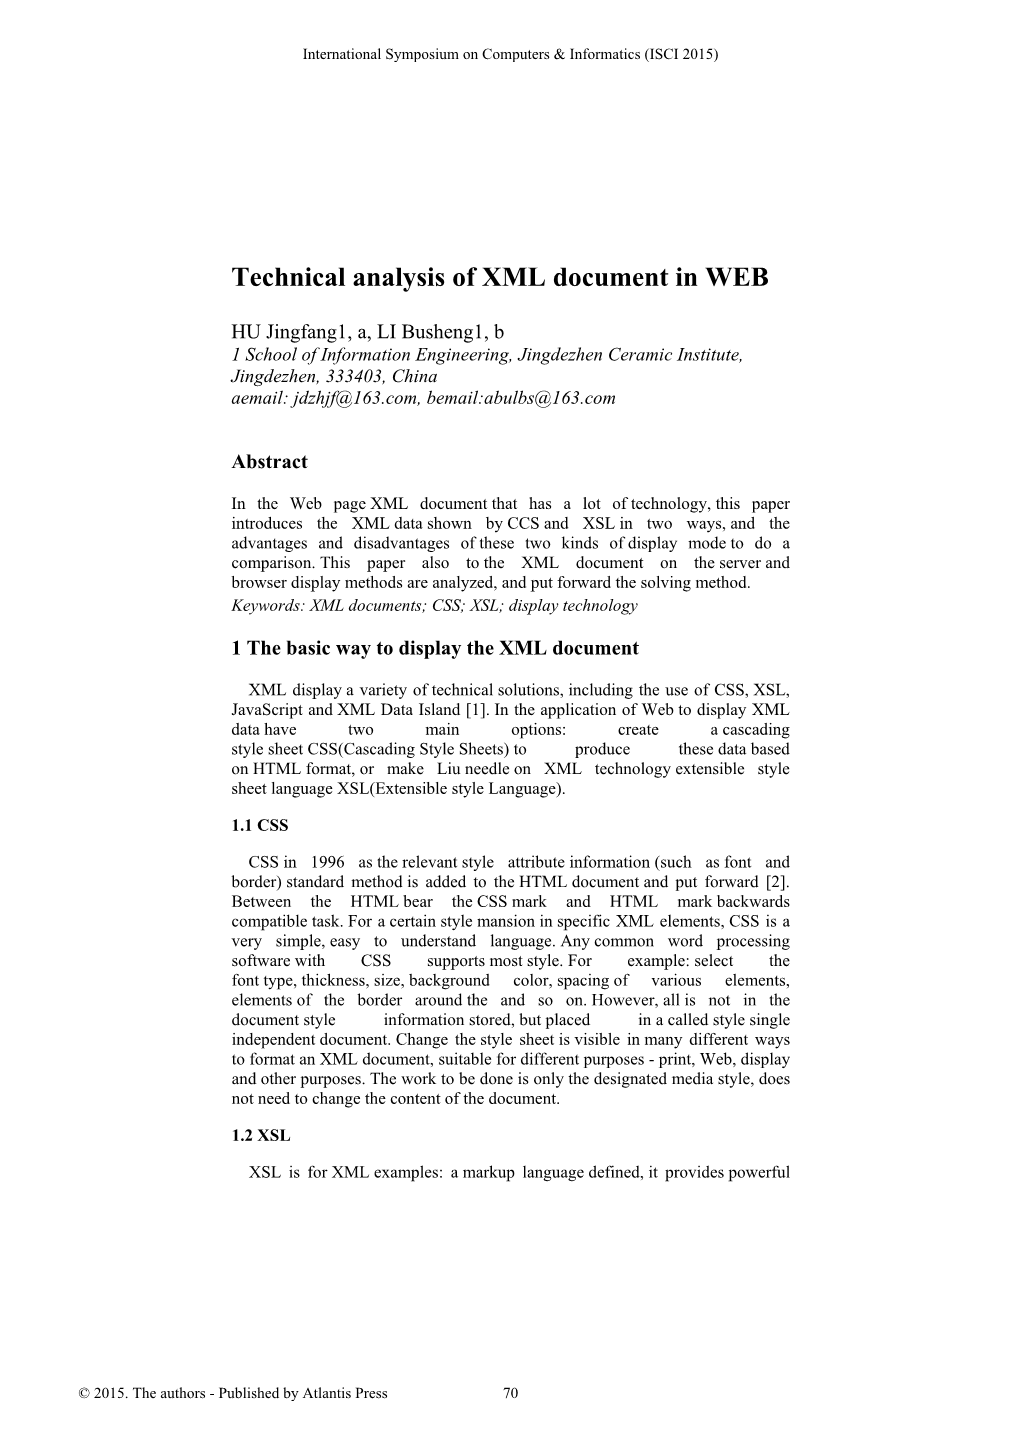 Technical Analysis Showed That the XML Document In